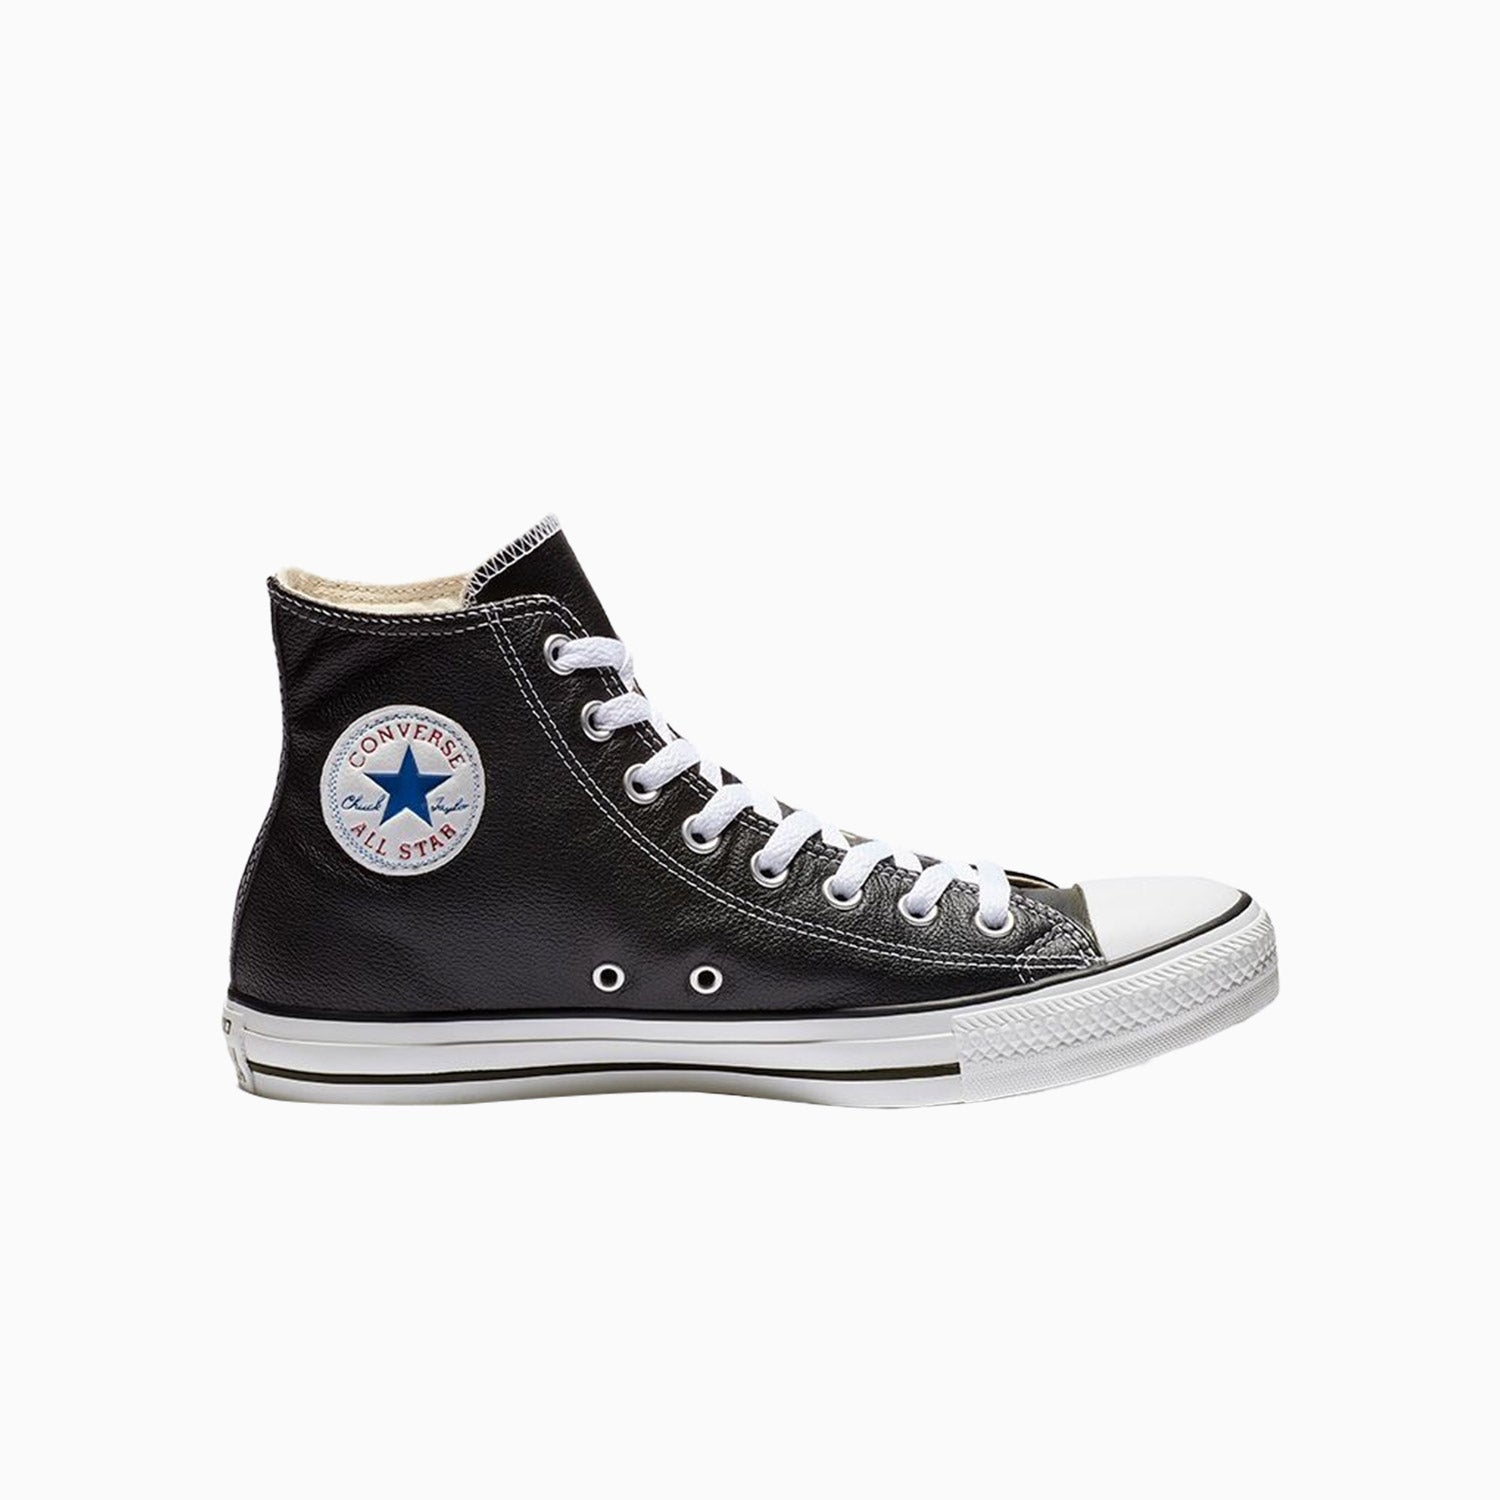 converse-chuck-taylor-all-star-leather-shoes-132170c